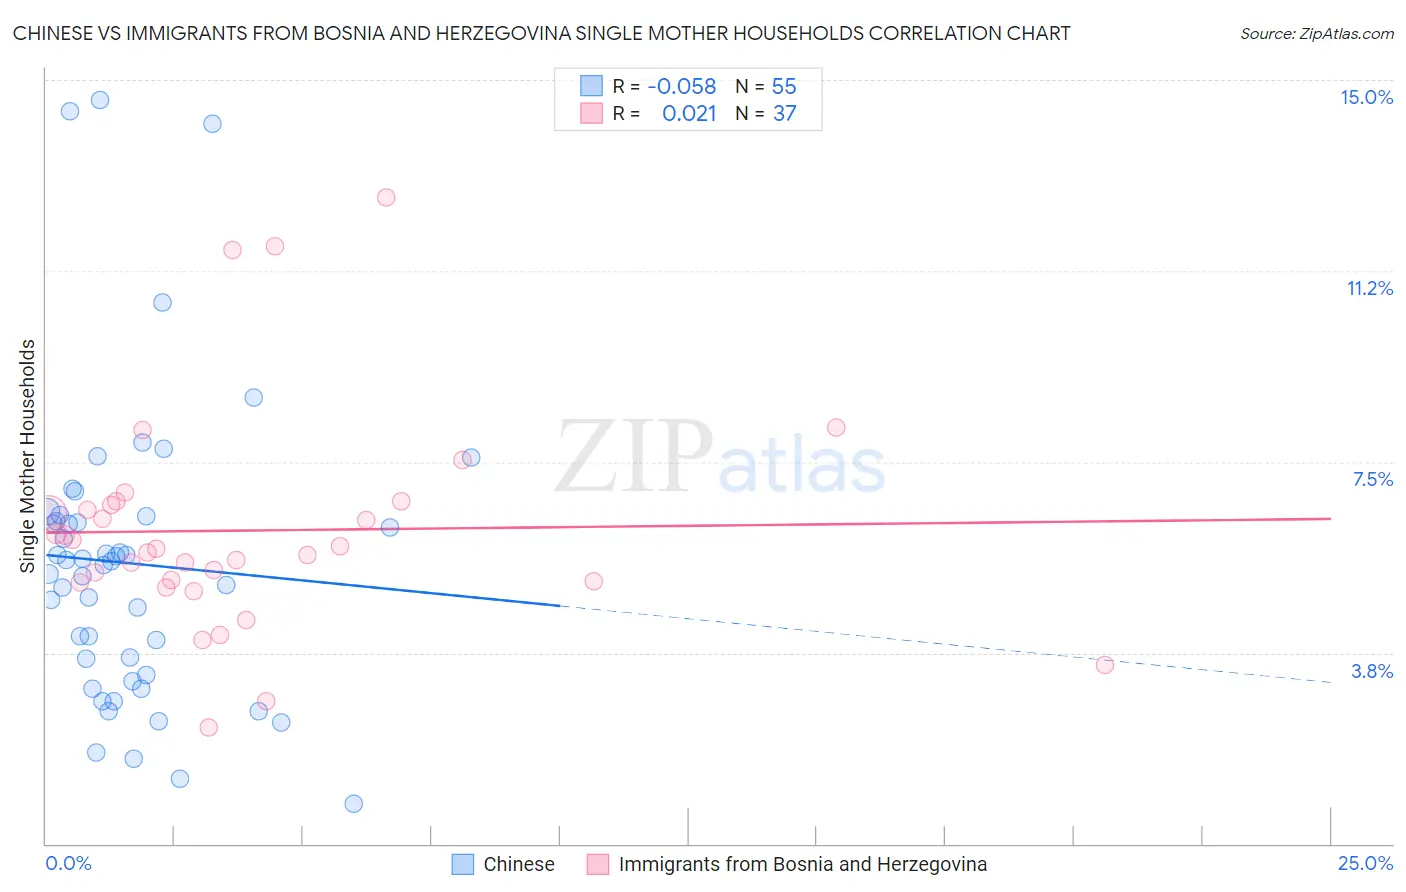 Chinese vs Immigrants from Bosnia and Herzegovina Single Mother Households